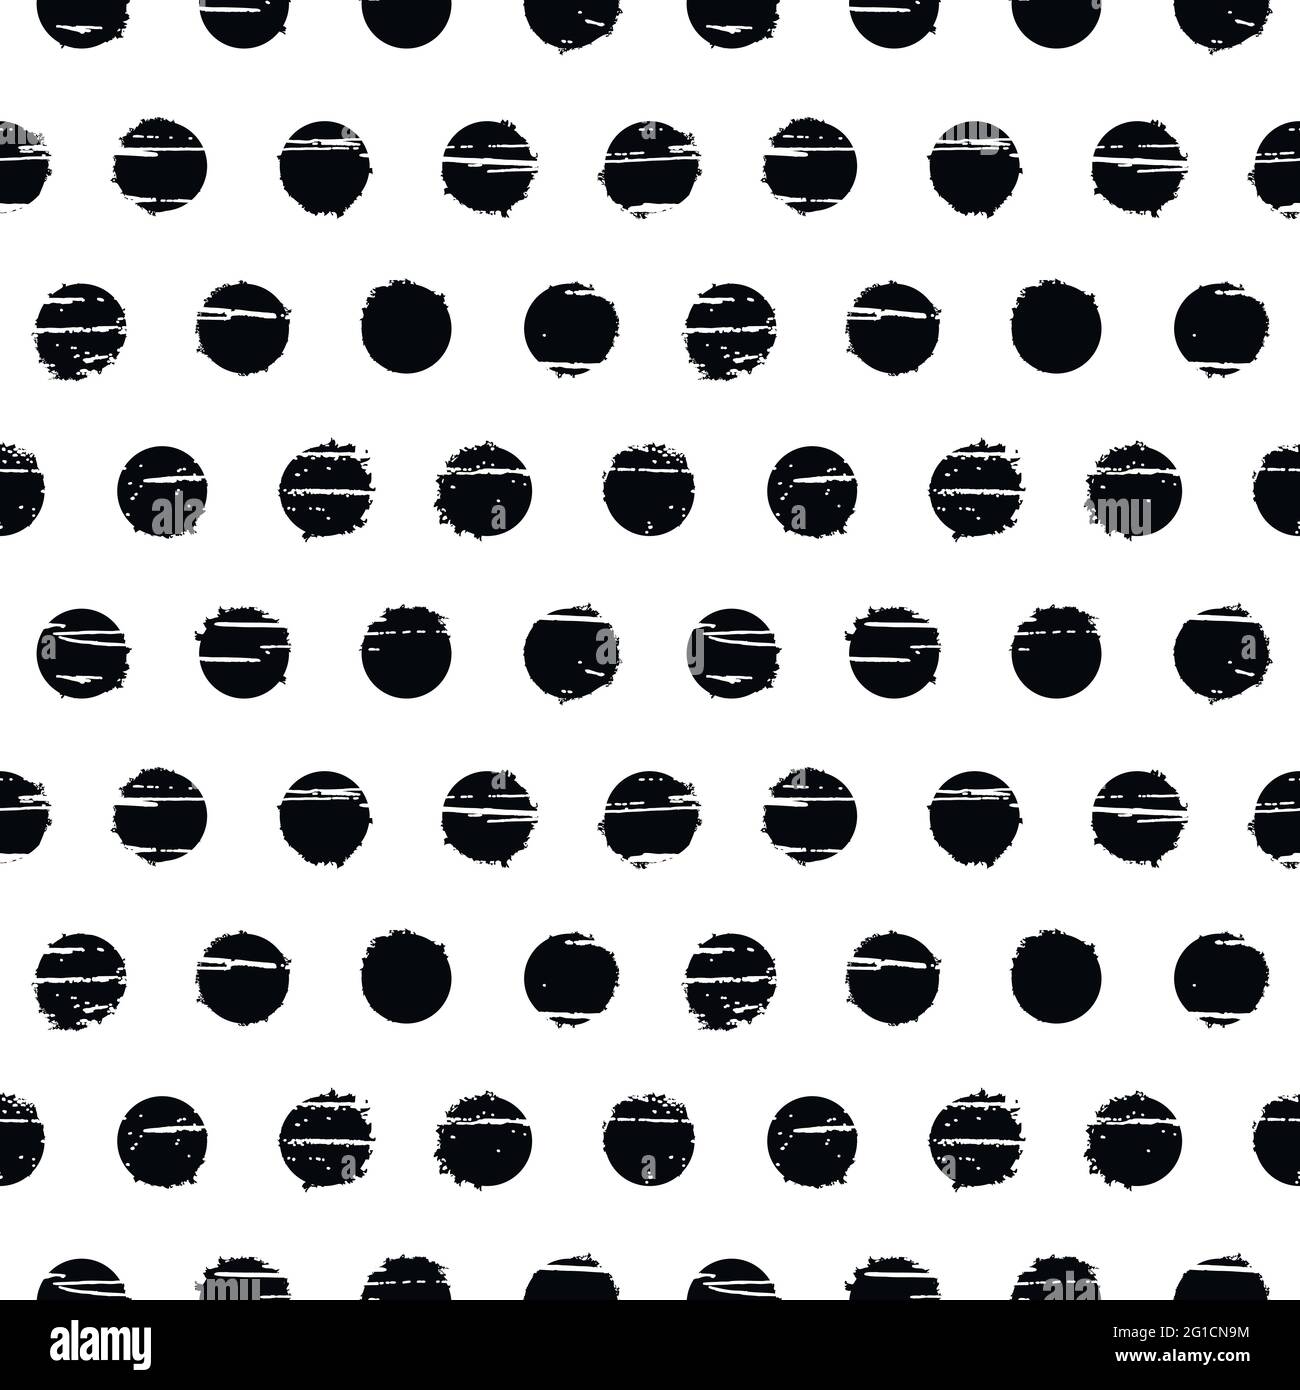 Polka dot seamless pattern. Black circles with grunge texture on a white background. Vector design. Stock Vector